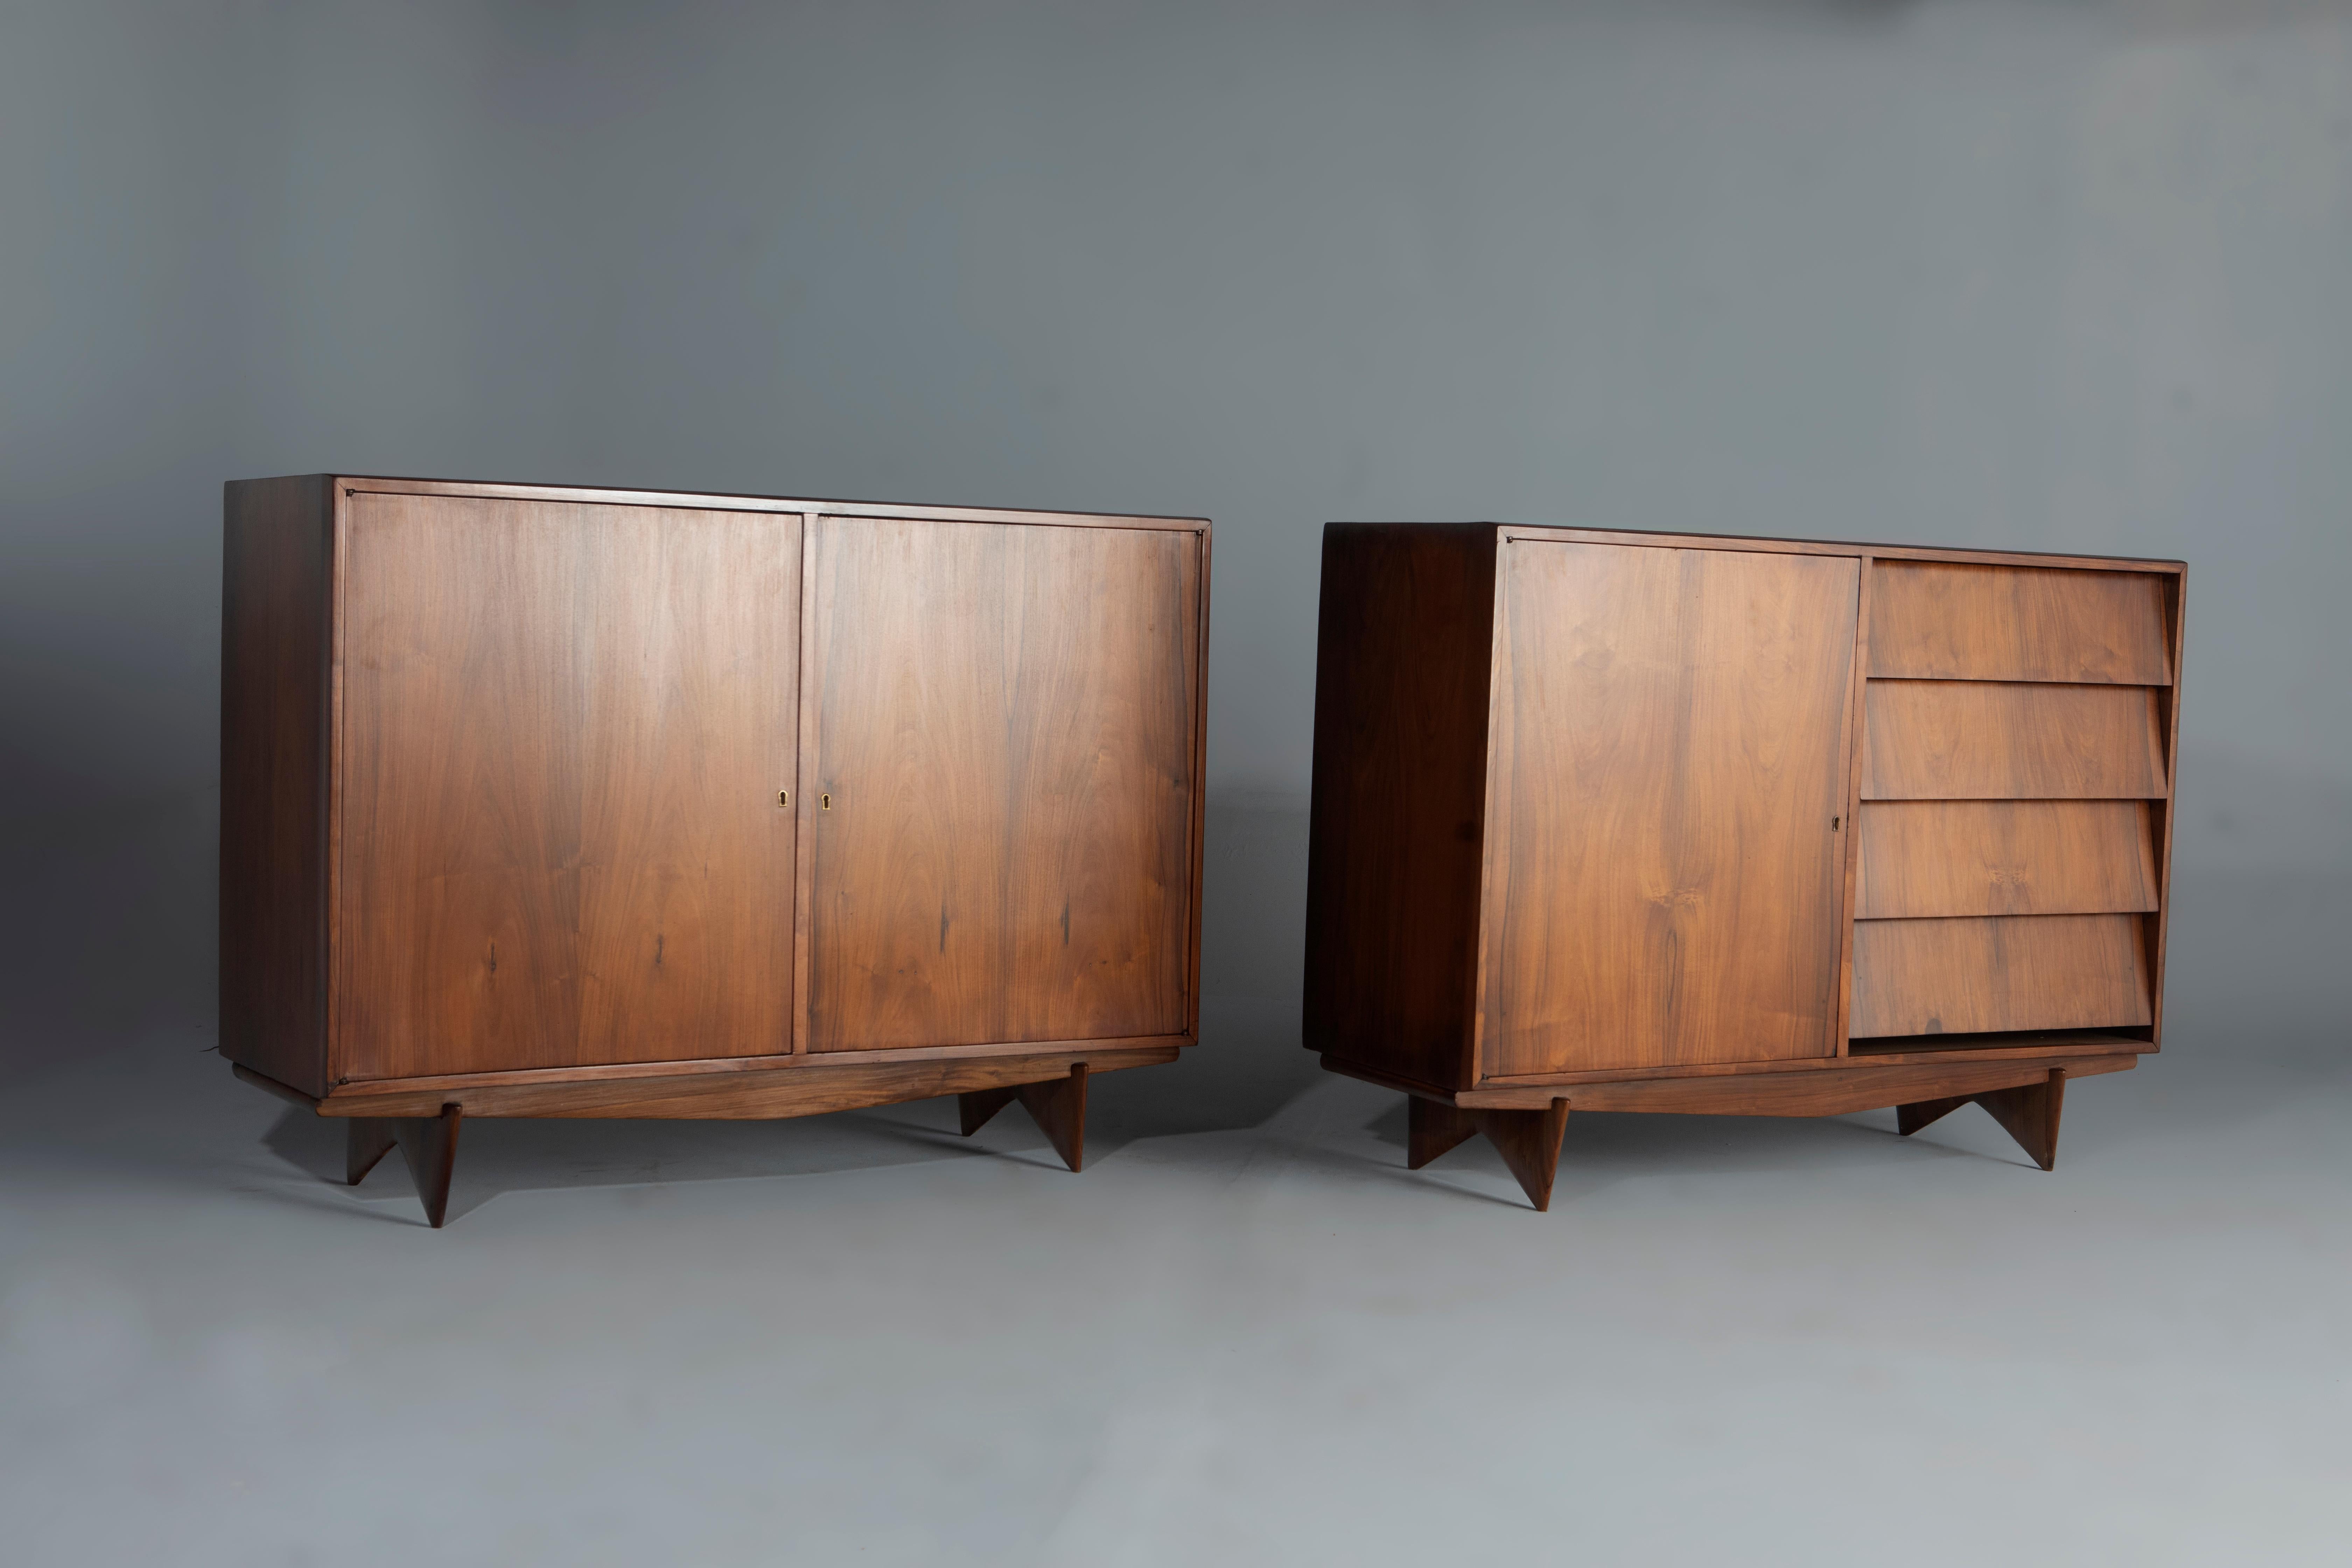 Varnished Mid-Century Modern Pair of Sideboards by Carlo Hauner, 1950s For Sale